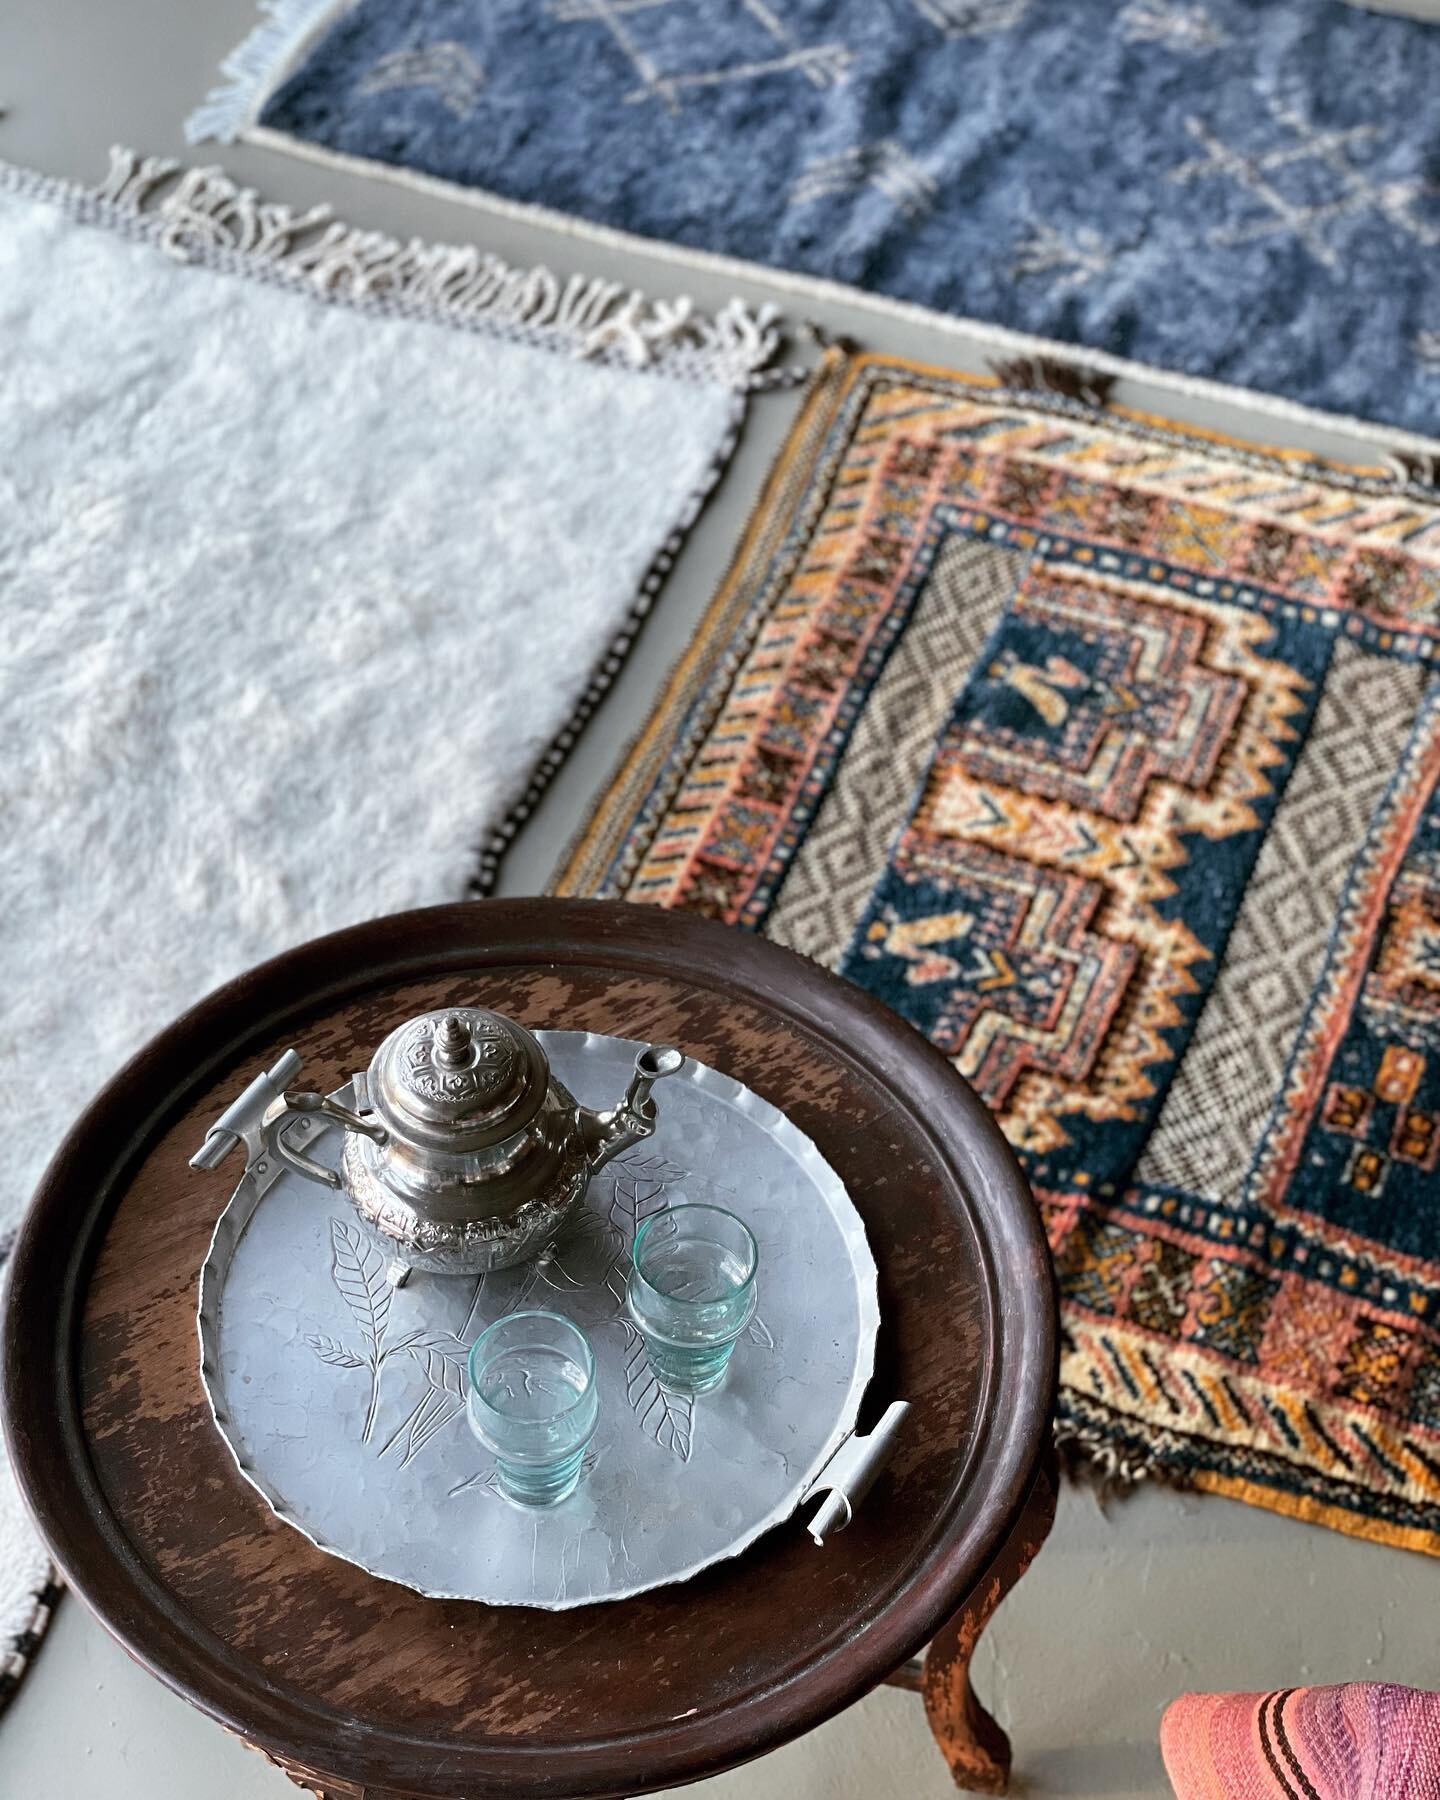 Atay time 🍃 Tea time 🫖 I have a small selection of Moroccan rugs at home and Moroccan mint tea dima (always!). I love sharing my experiences in Morocco and with travel and life ✨ Who would be interested in looking at carpets while sipping on Morocc